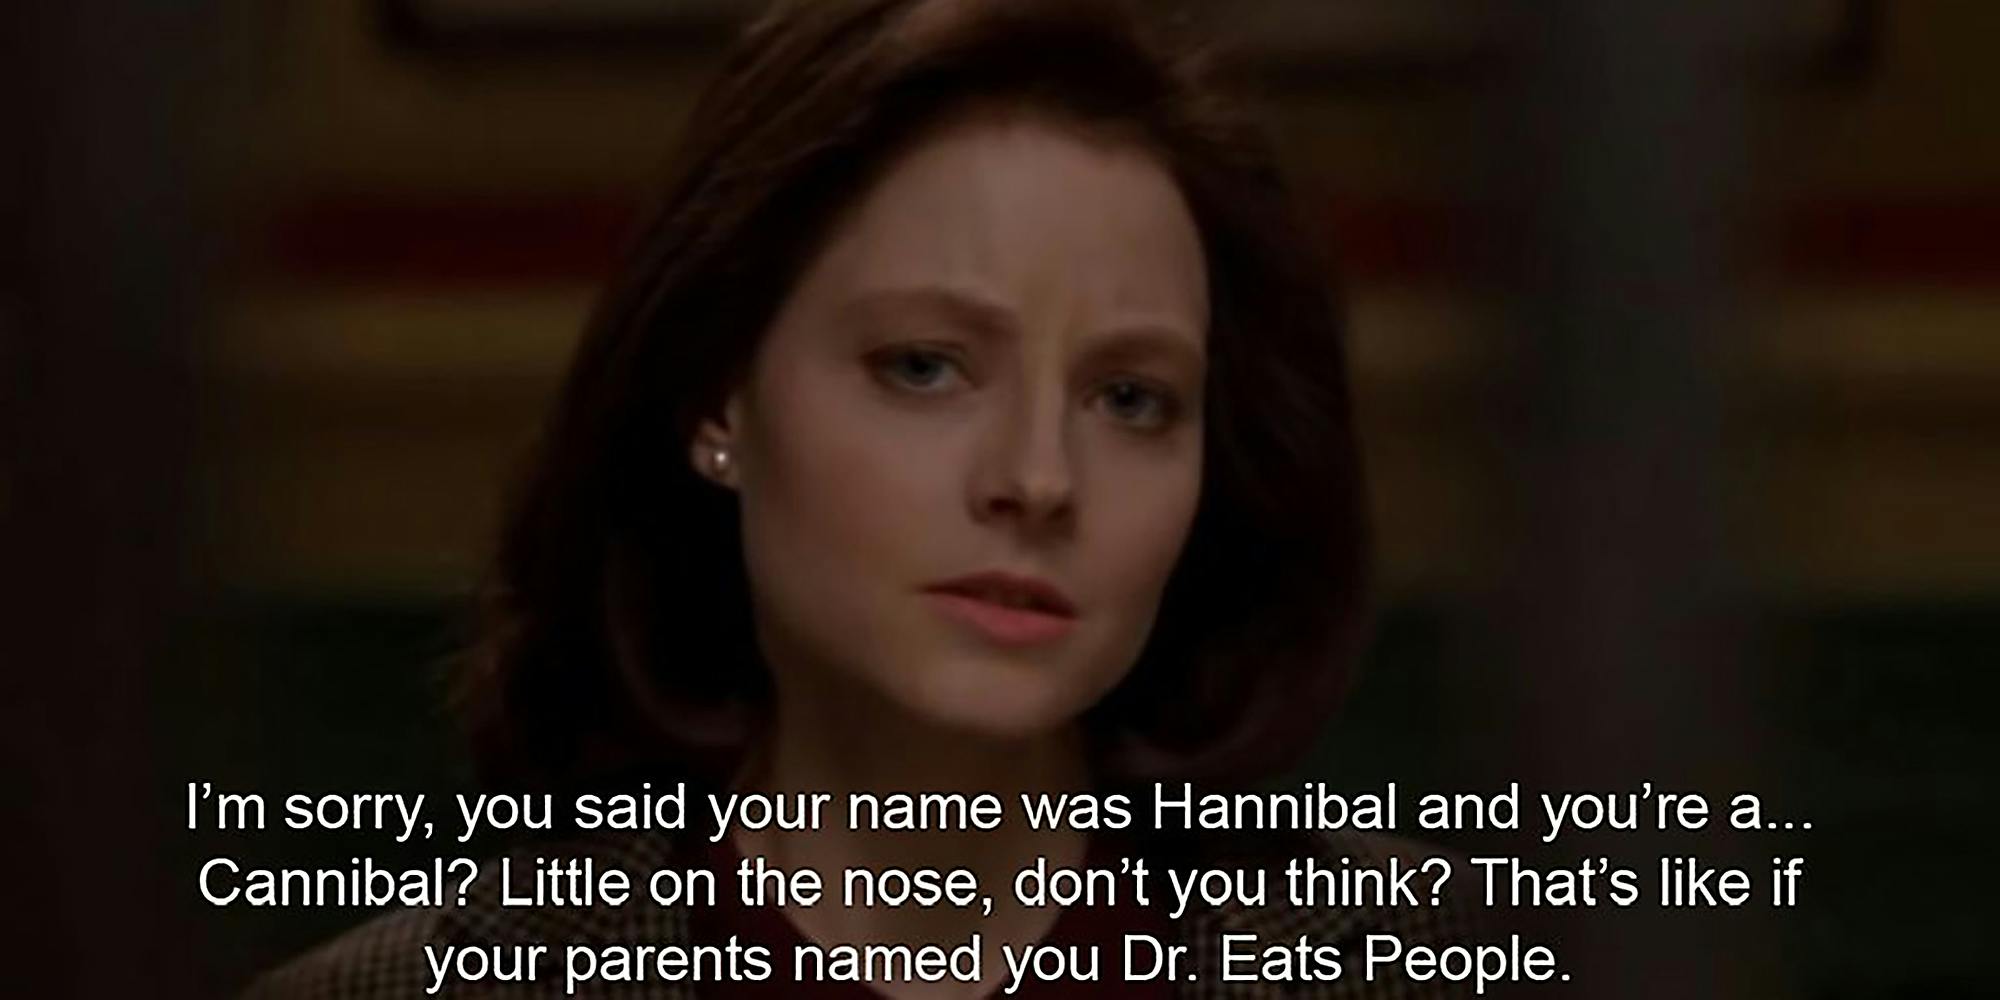 Jodie Foster in Silence of the Lambs looking at camera.